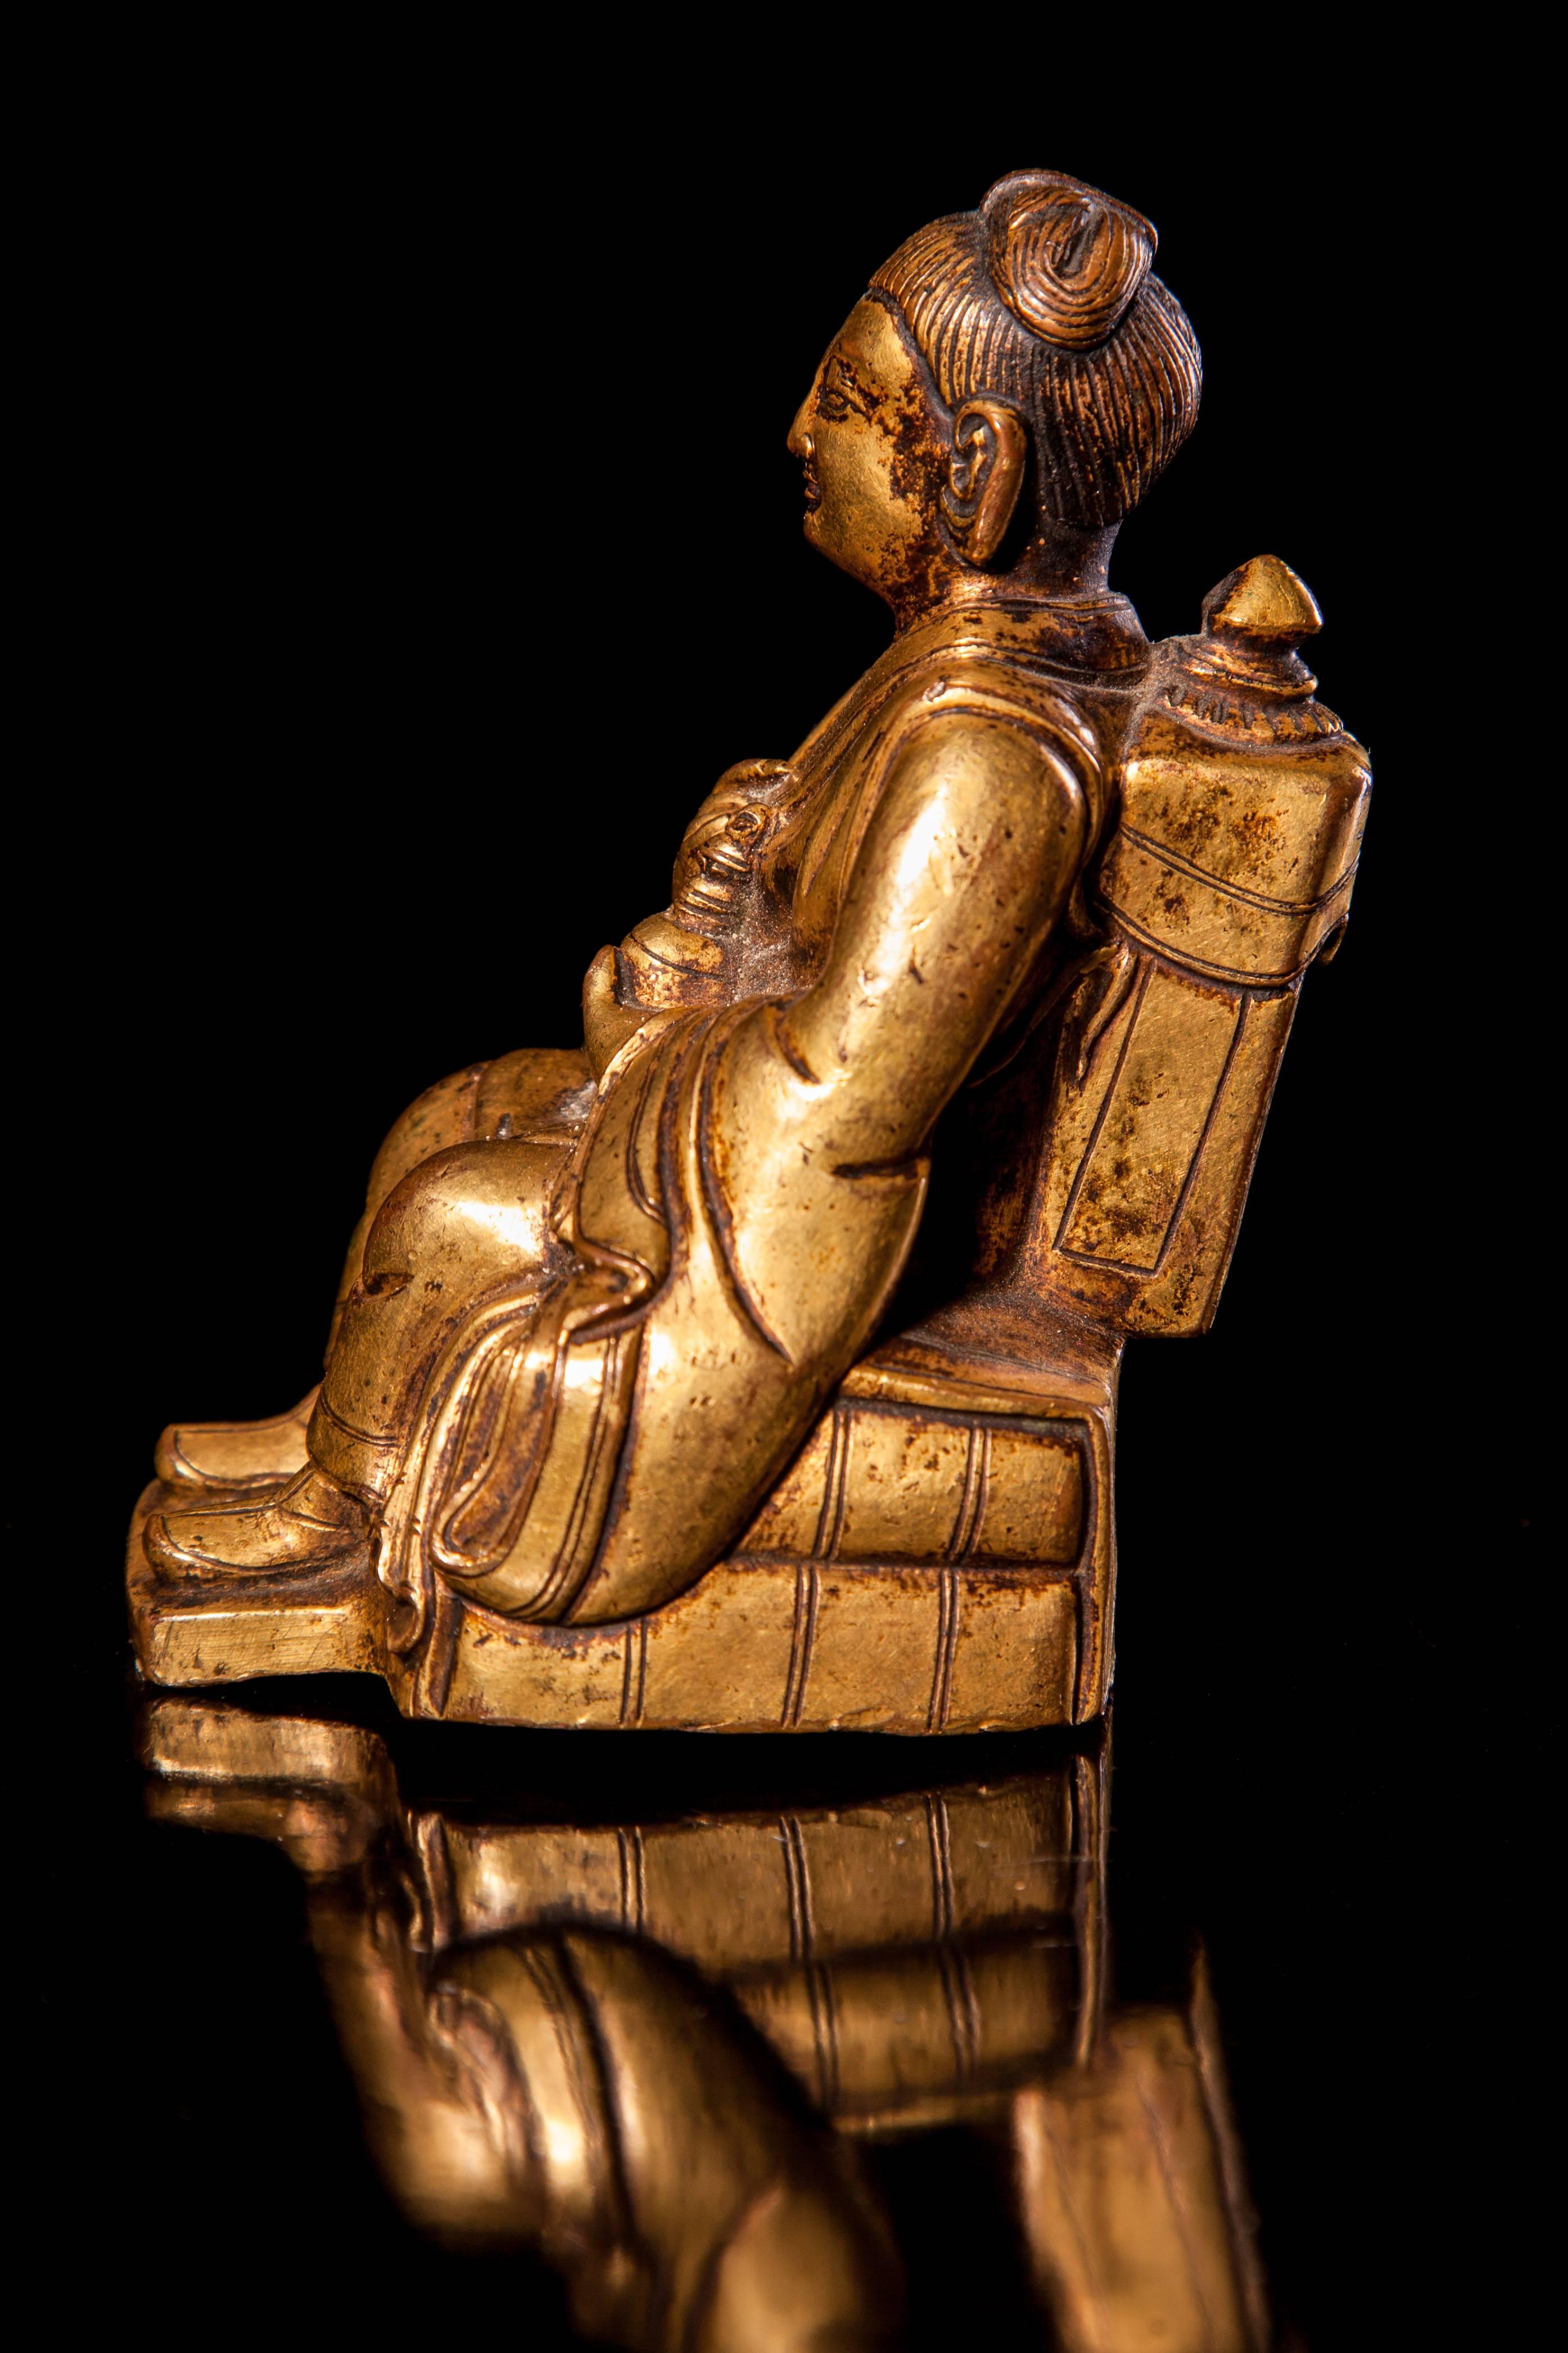 Seated in 'Royal Ease' on a pillow base, holding a fly whisk and bumpa, clad in long flowing robes, the face with heavy-lidded eyes, the hair pulled into a topknot, wearing a backpack, with a tiger on his right.
Measures: 3 7/8 in. (9.8 cm.) high.